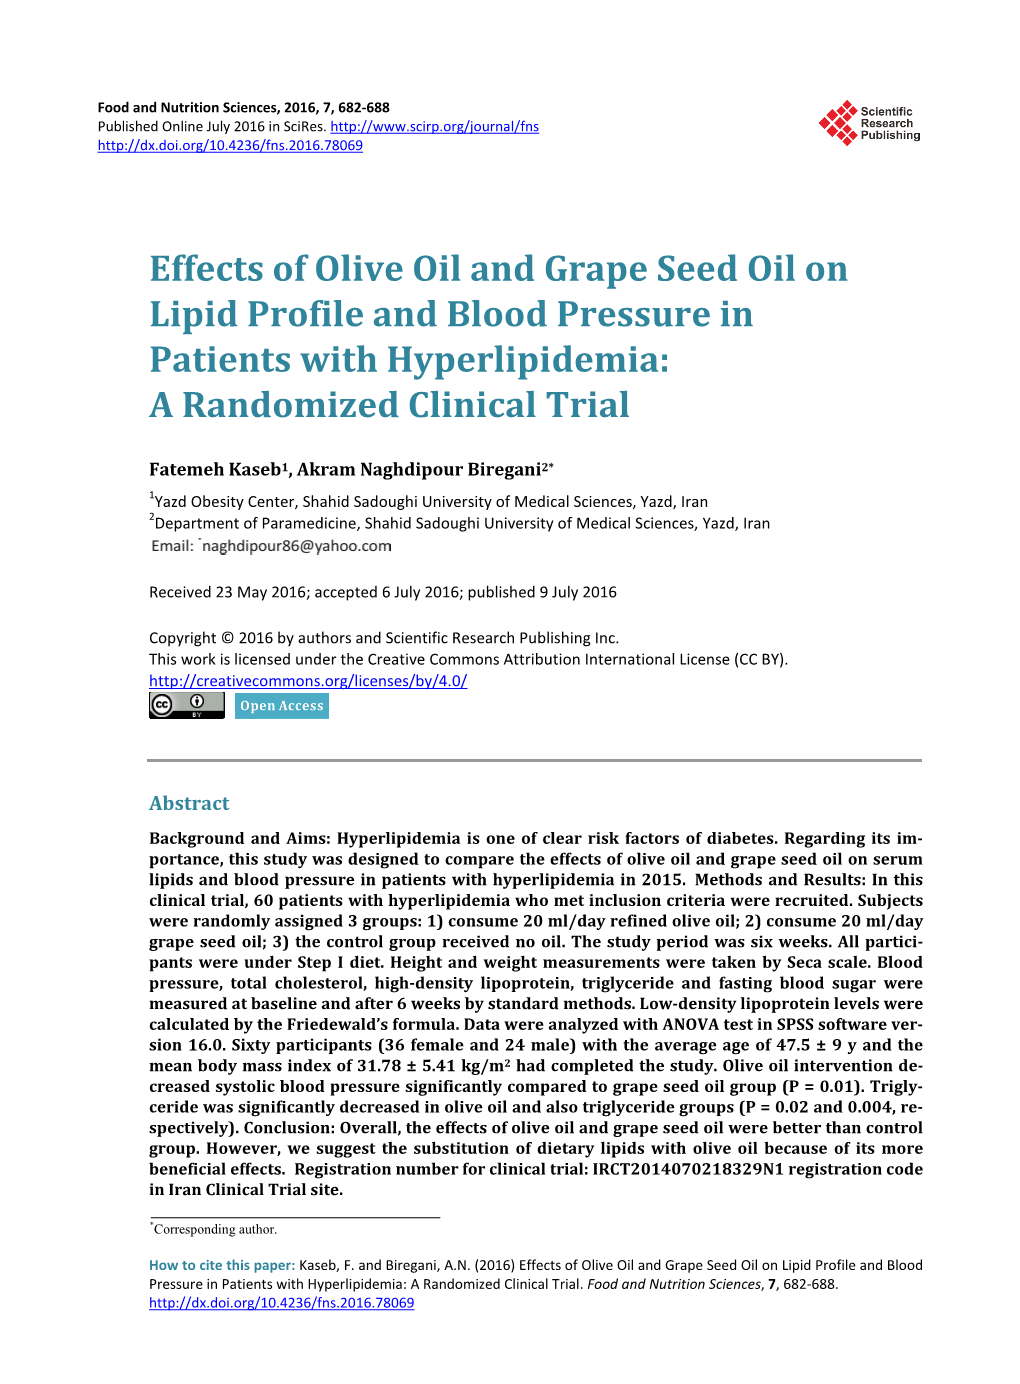 Effects of Olive Oil and Grape Seed Oil on Lipid Profile and Blood Pressure in Patients with Hyperlipidemia: a Randomized Clinical Trial